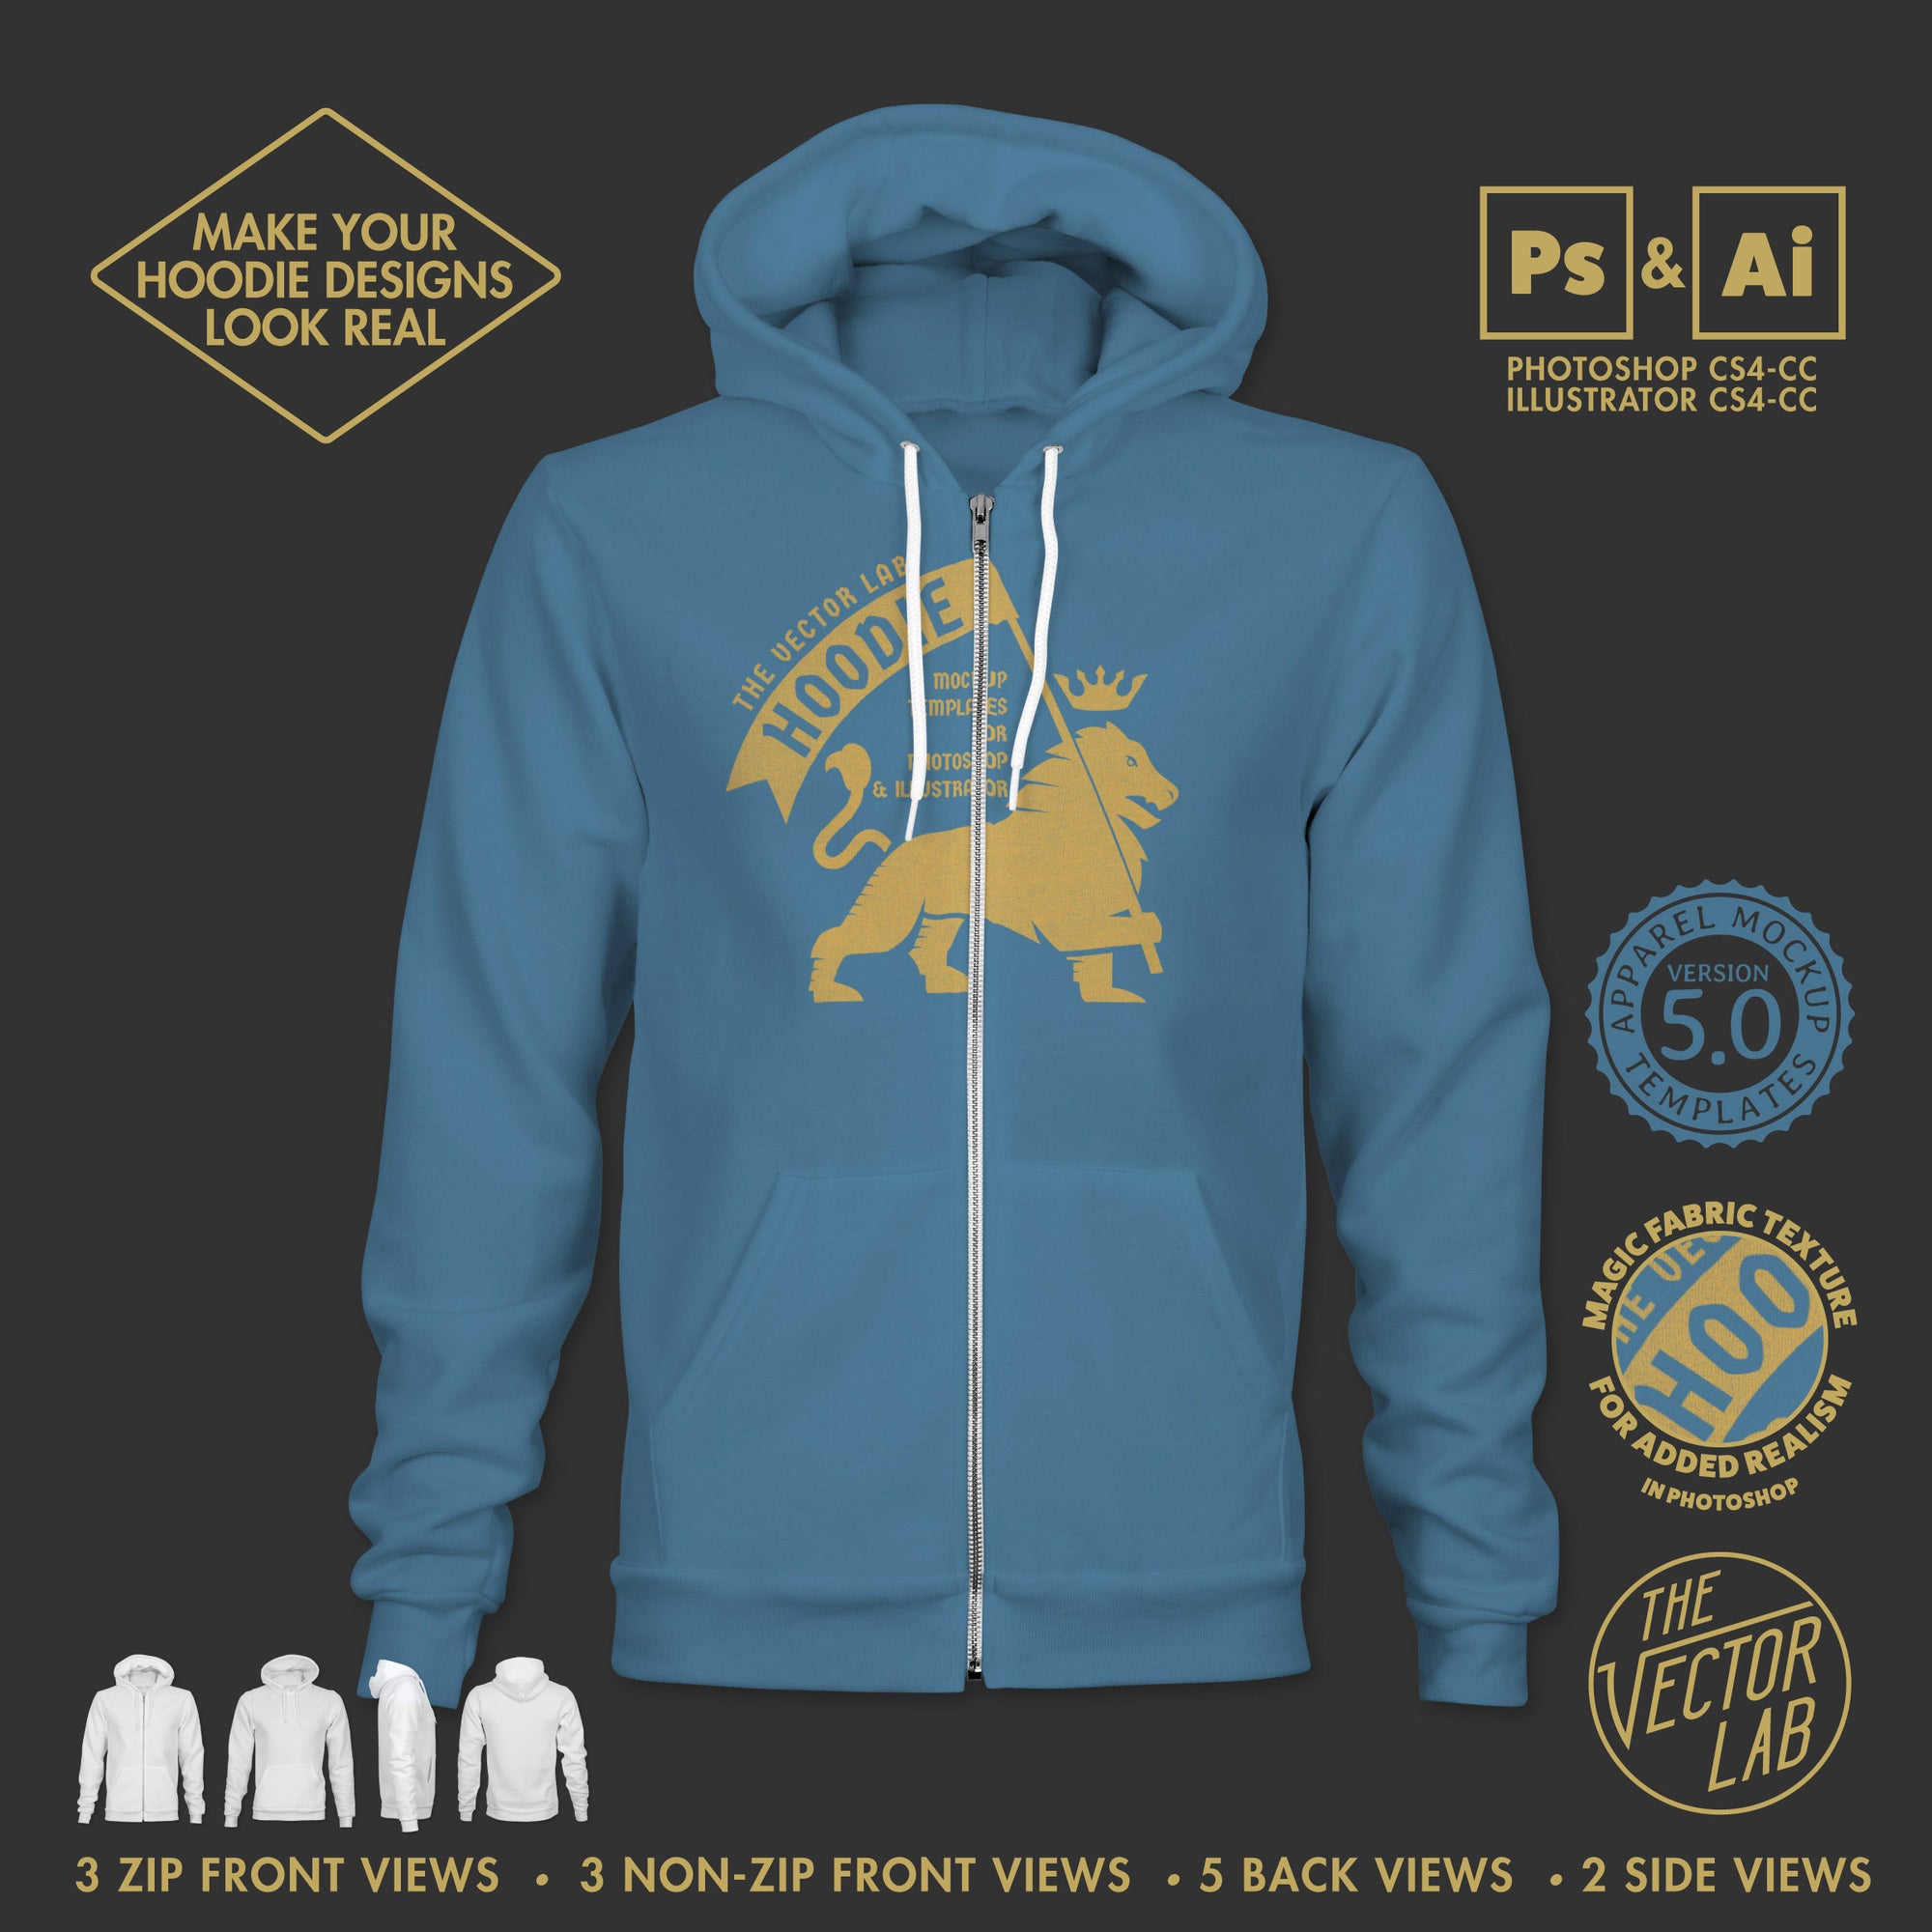 Download Men's Hoodie Mockup Templates for Adobe - TheVectorLab